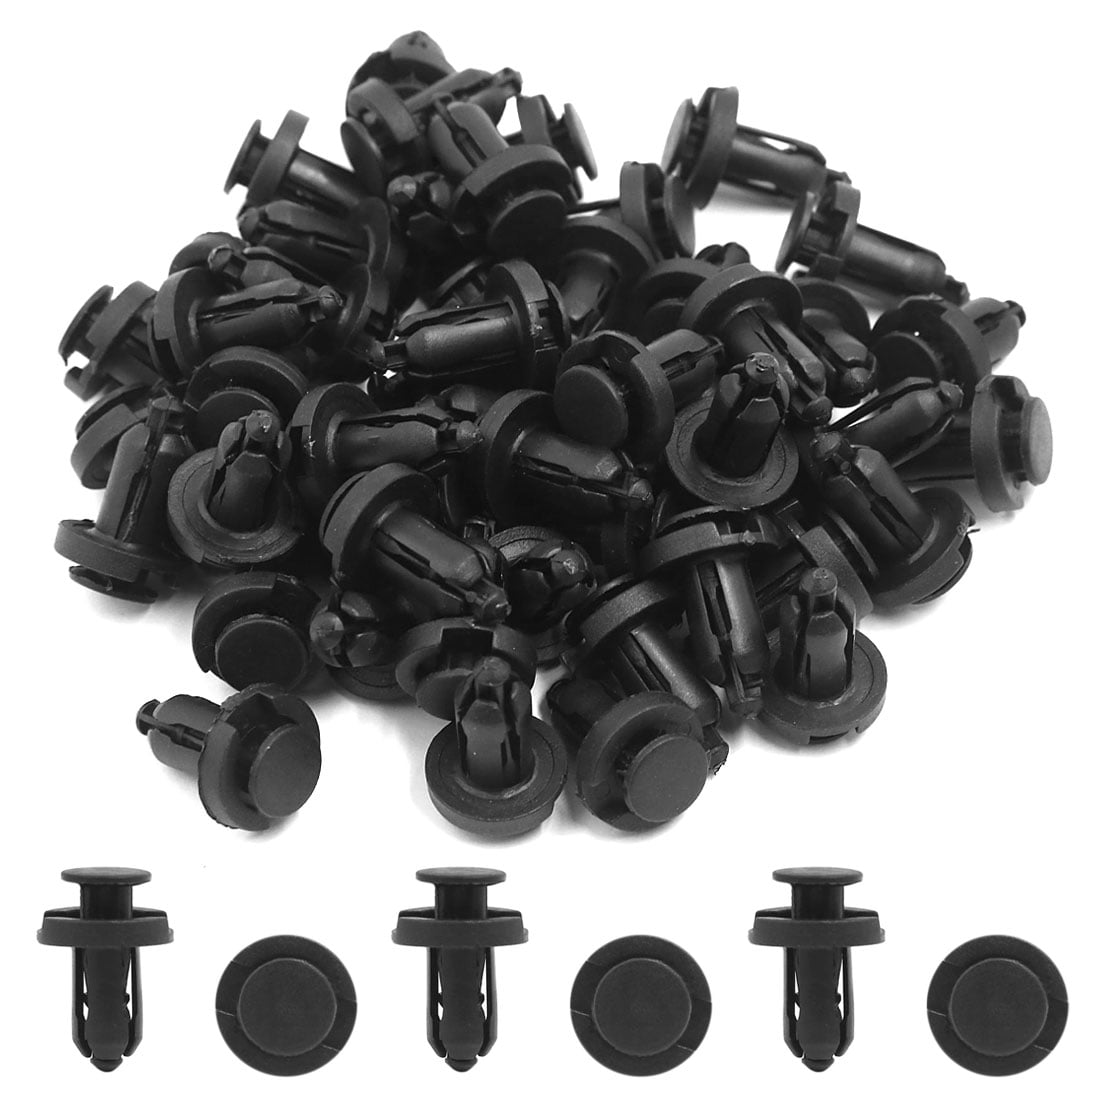 Shields Ducts etc 10x Plastic Trim Fastener Clips Used by BMW for Boot Lining